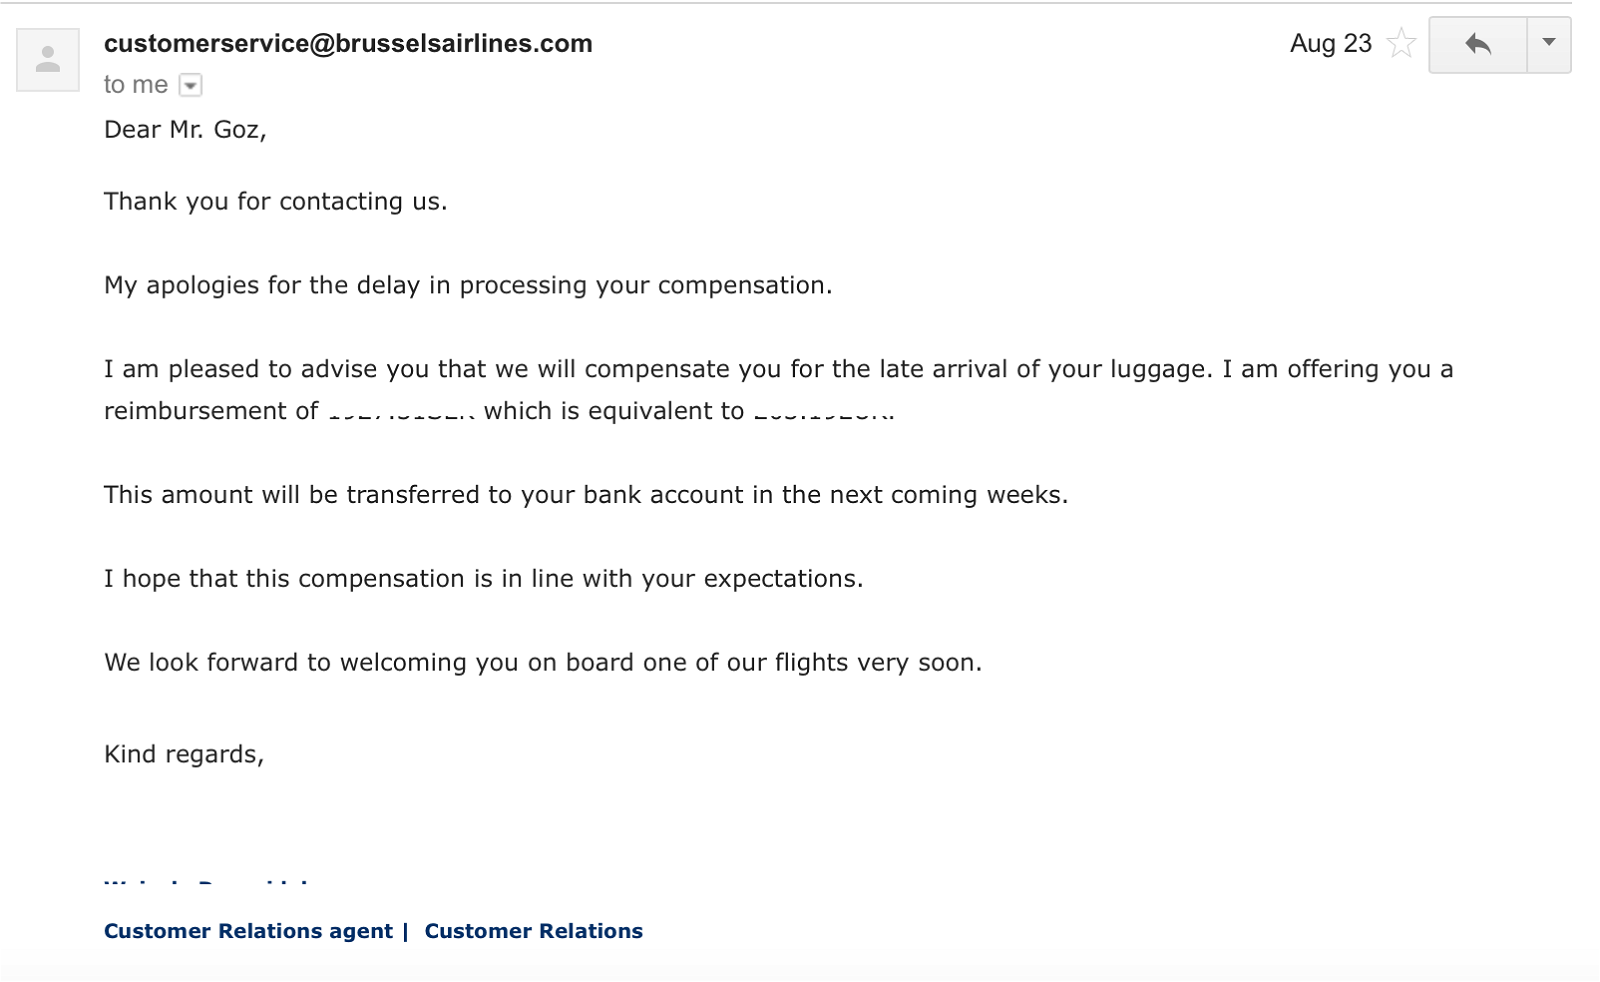 Brussels Airlines customer service response